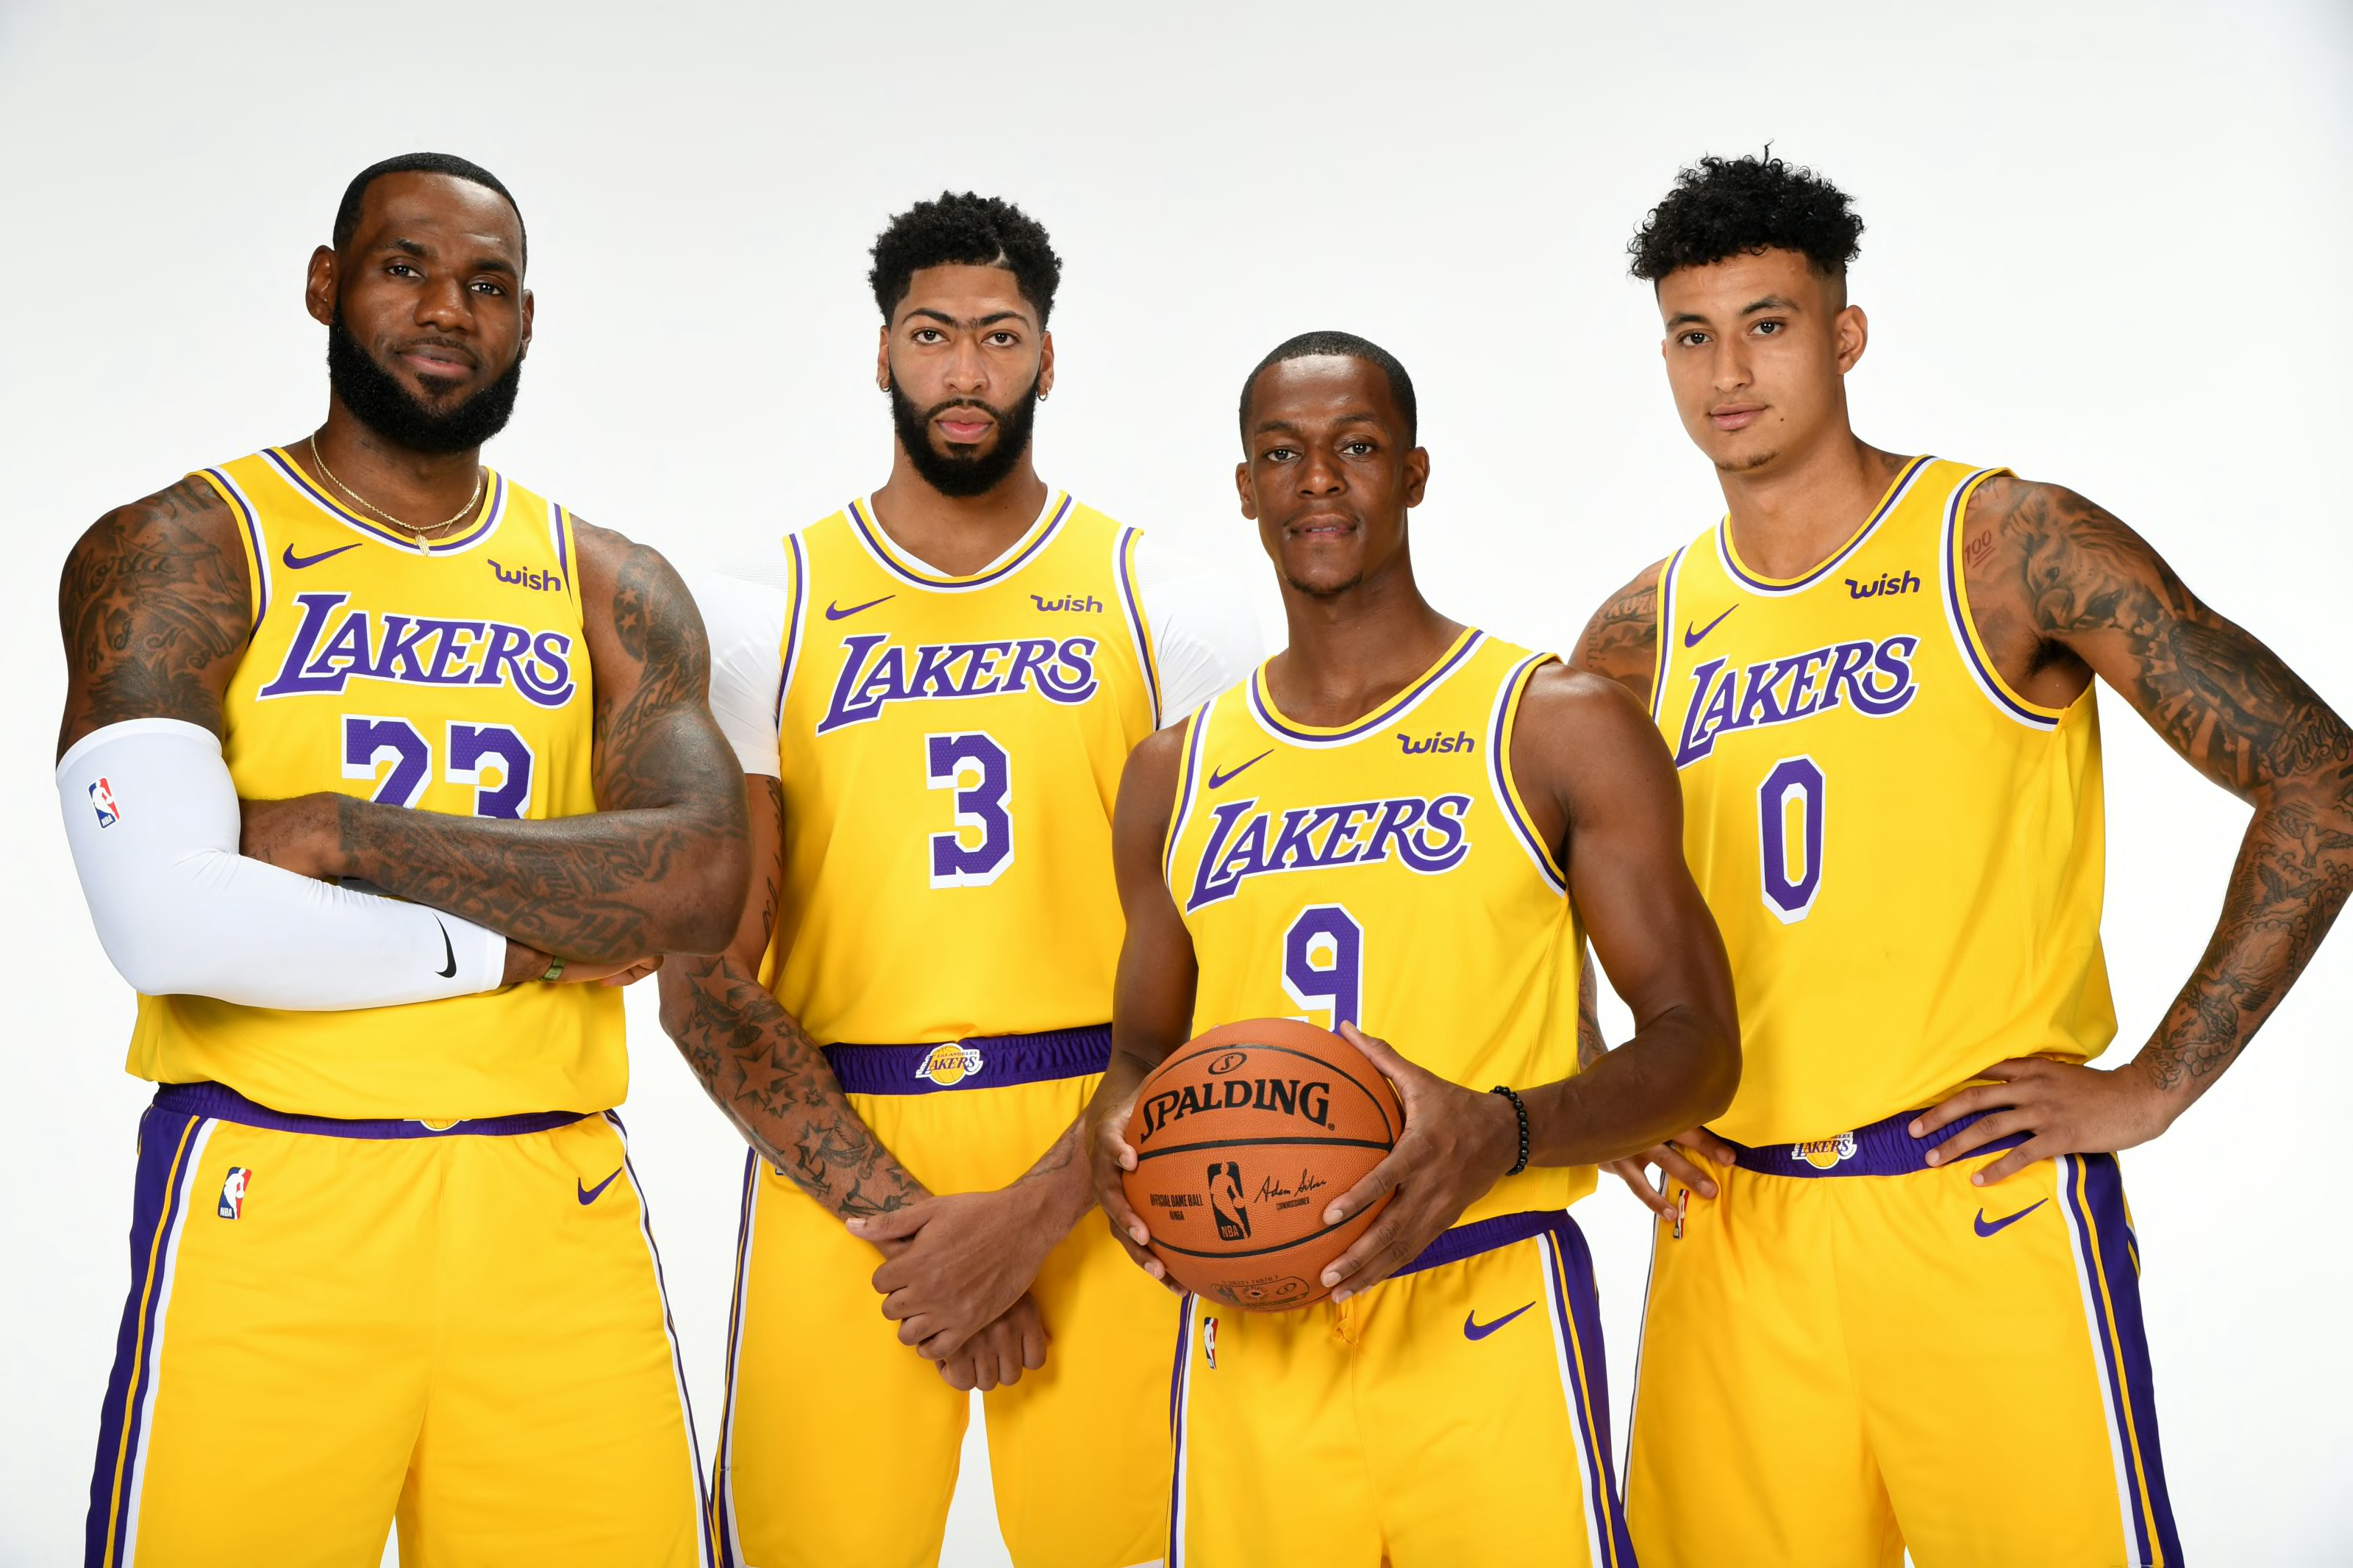 Los Angeles Lakers: 3 Statistics that show they are better than the